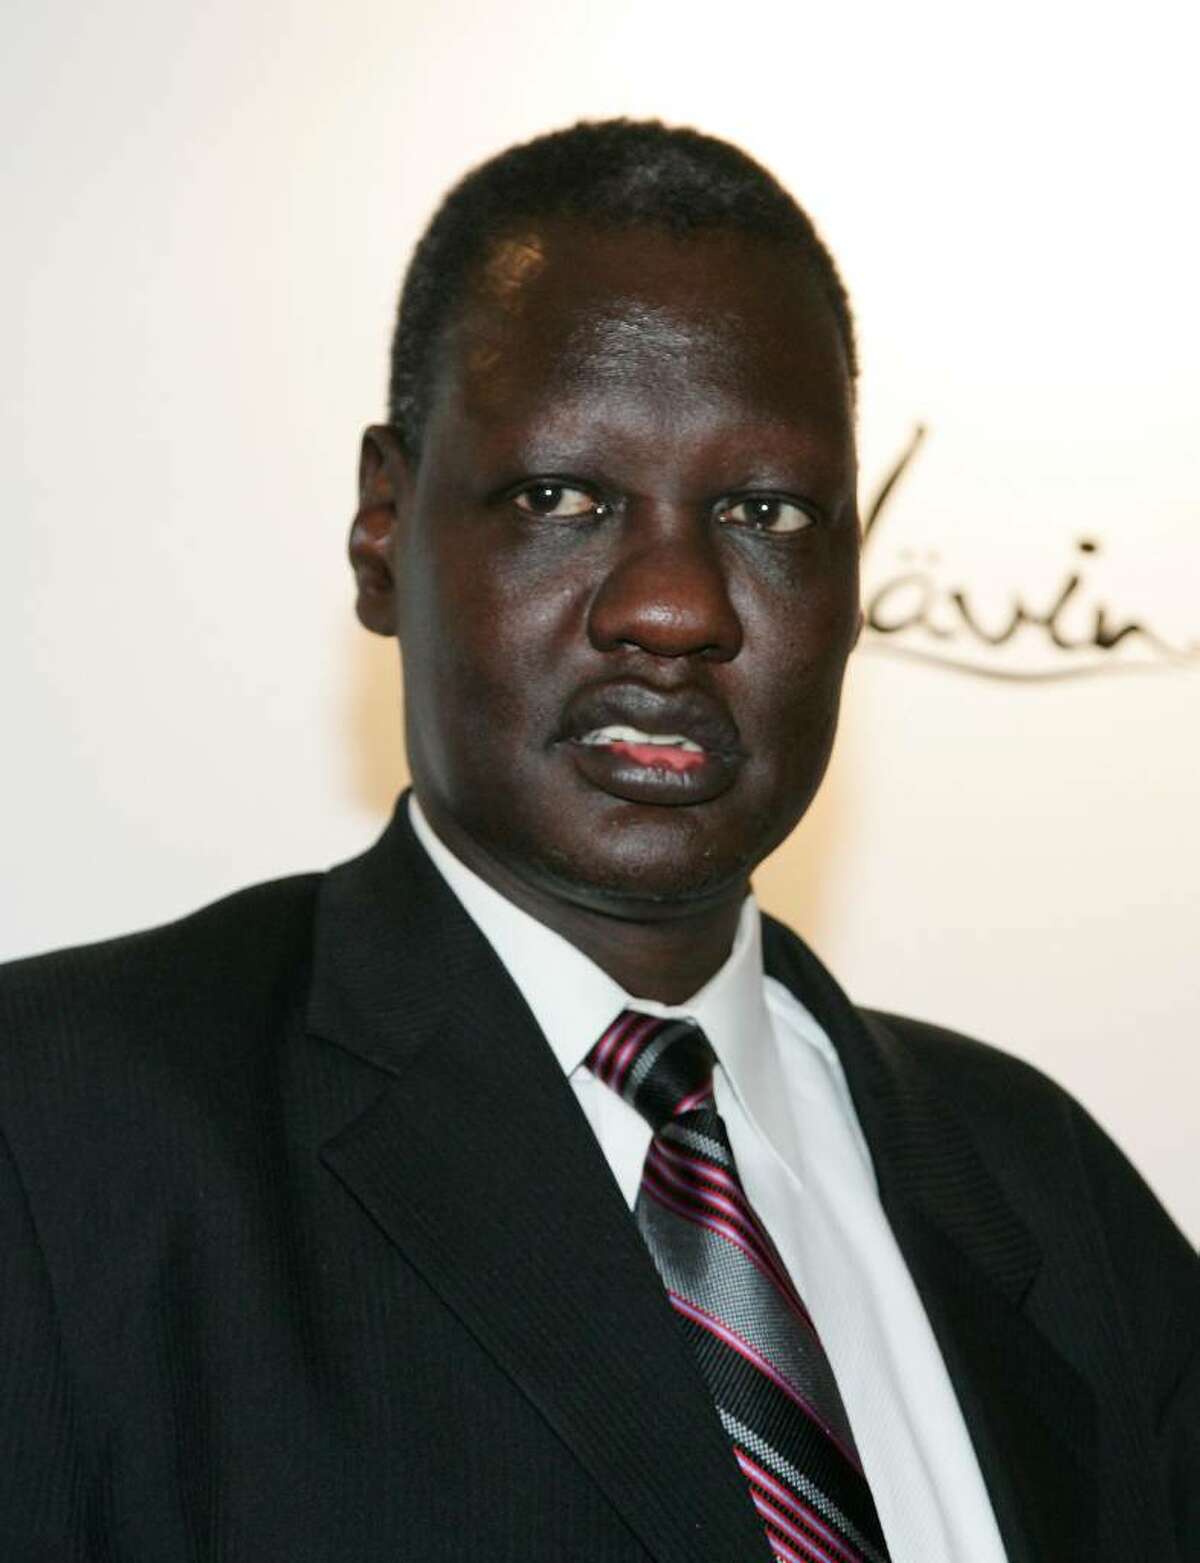 Manute Bol May Have Been Way Older Than Everyone Thought When He Played in  the NBA